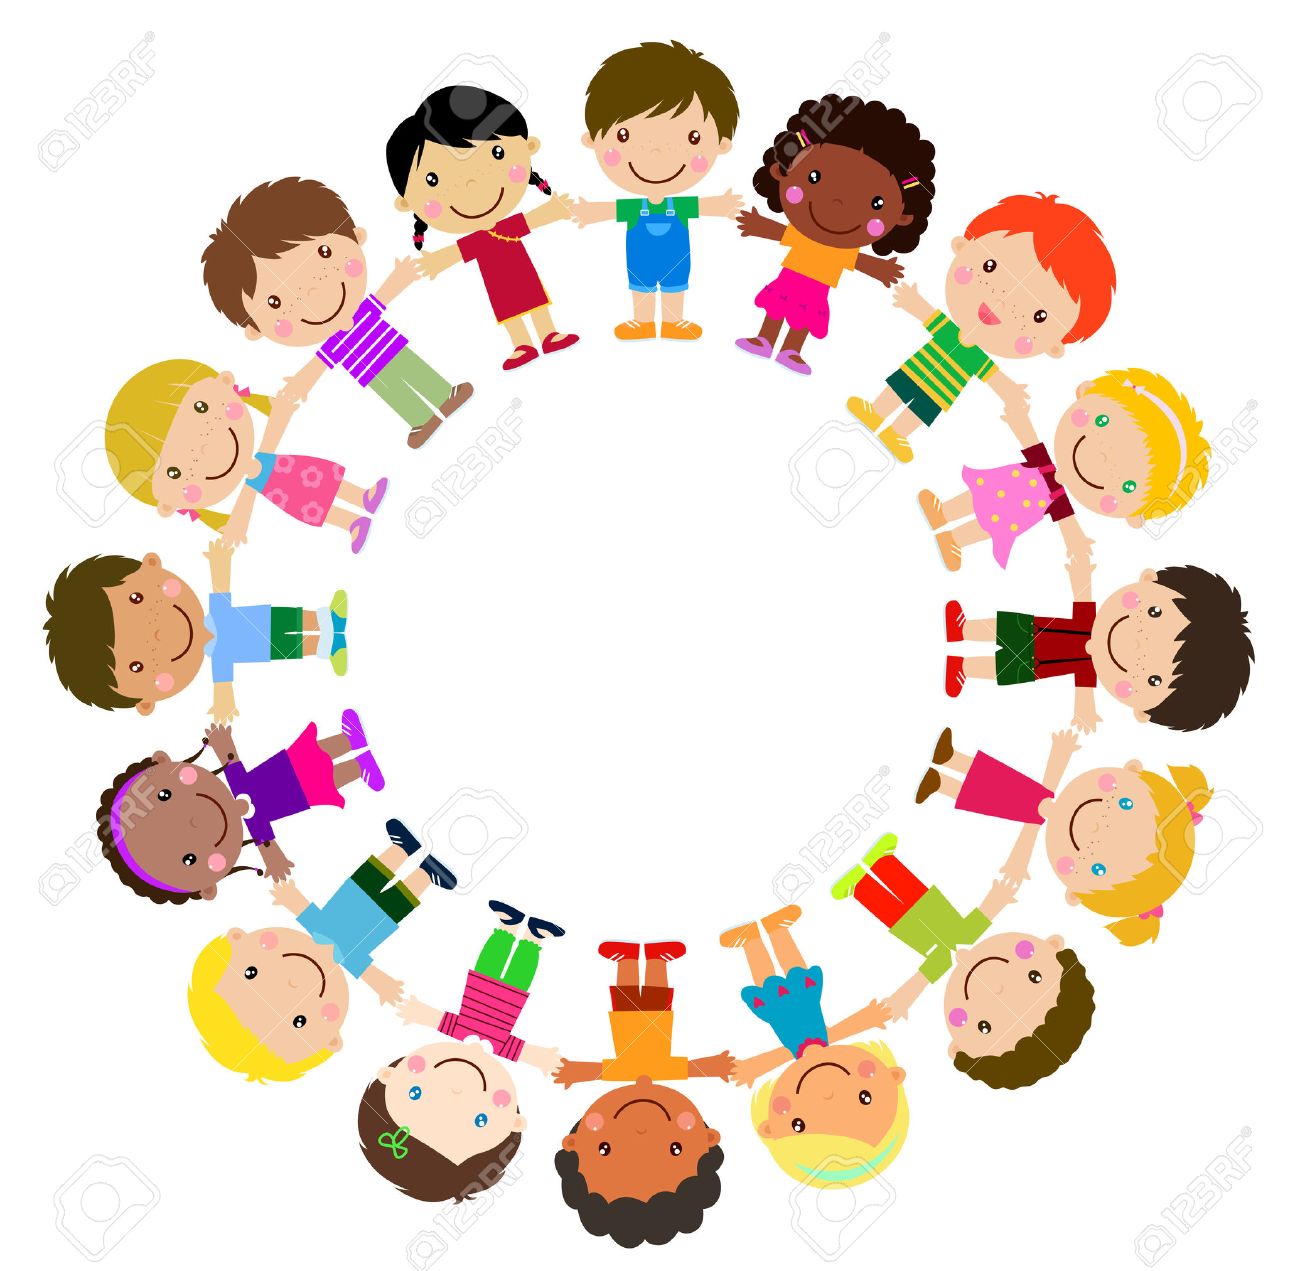 Kids in a circle clipart